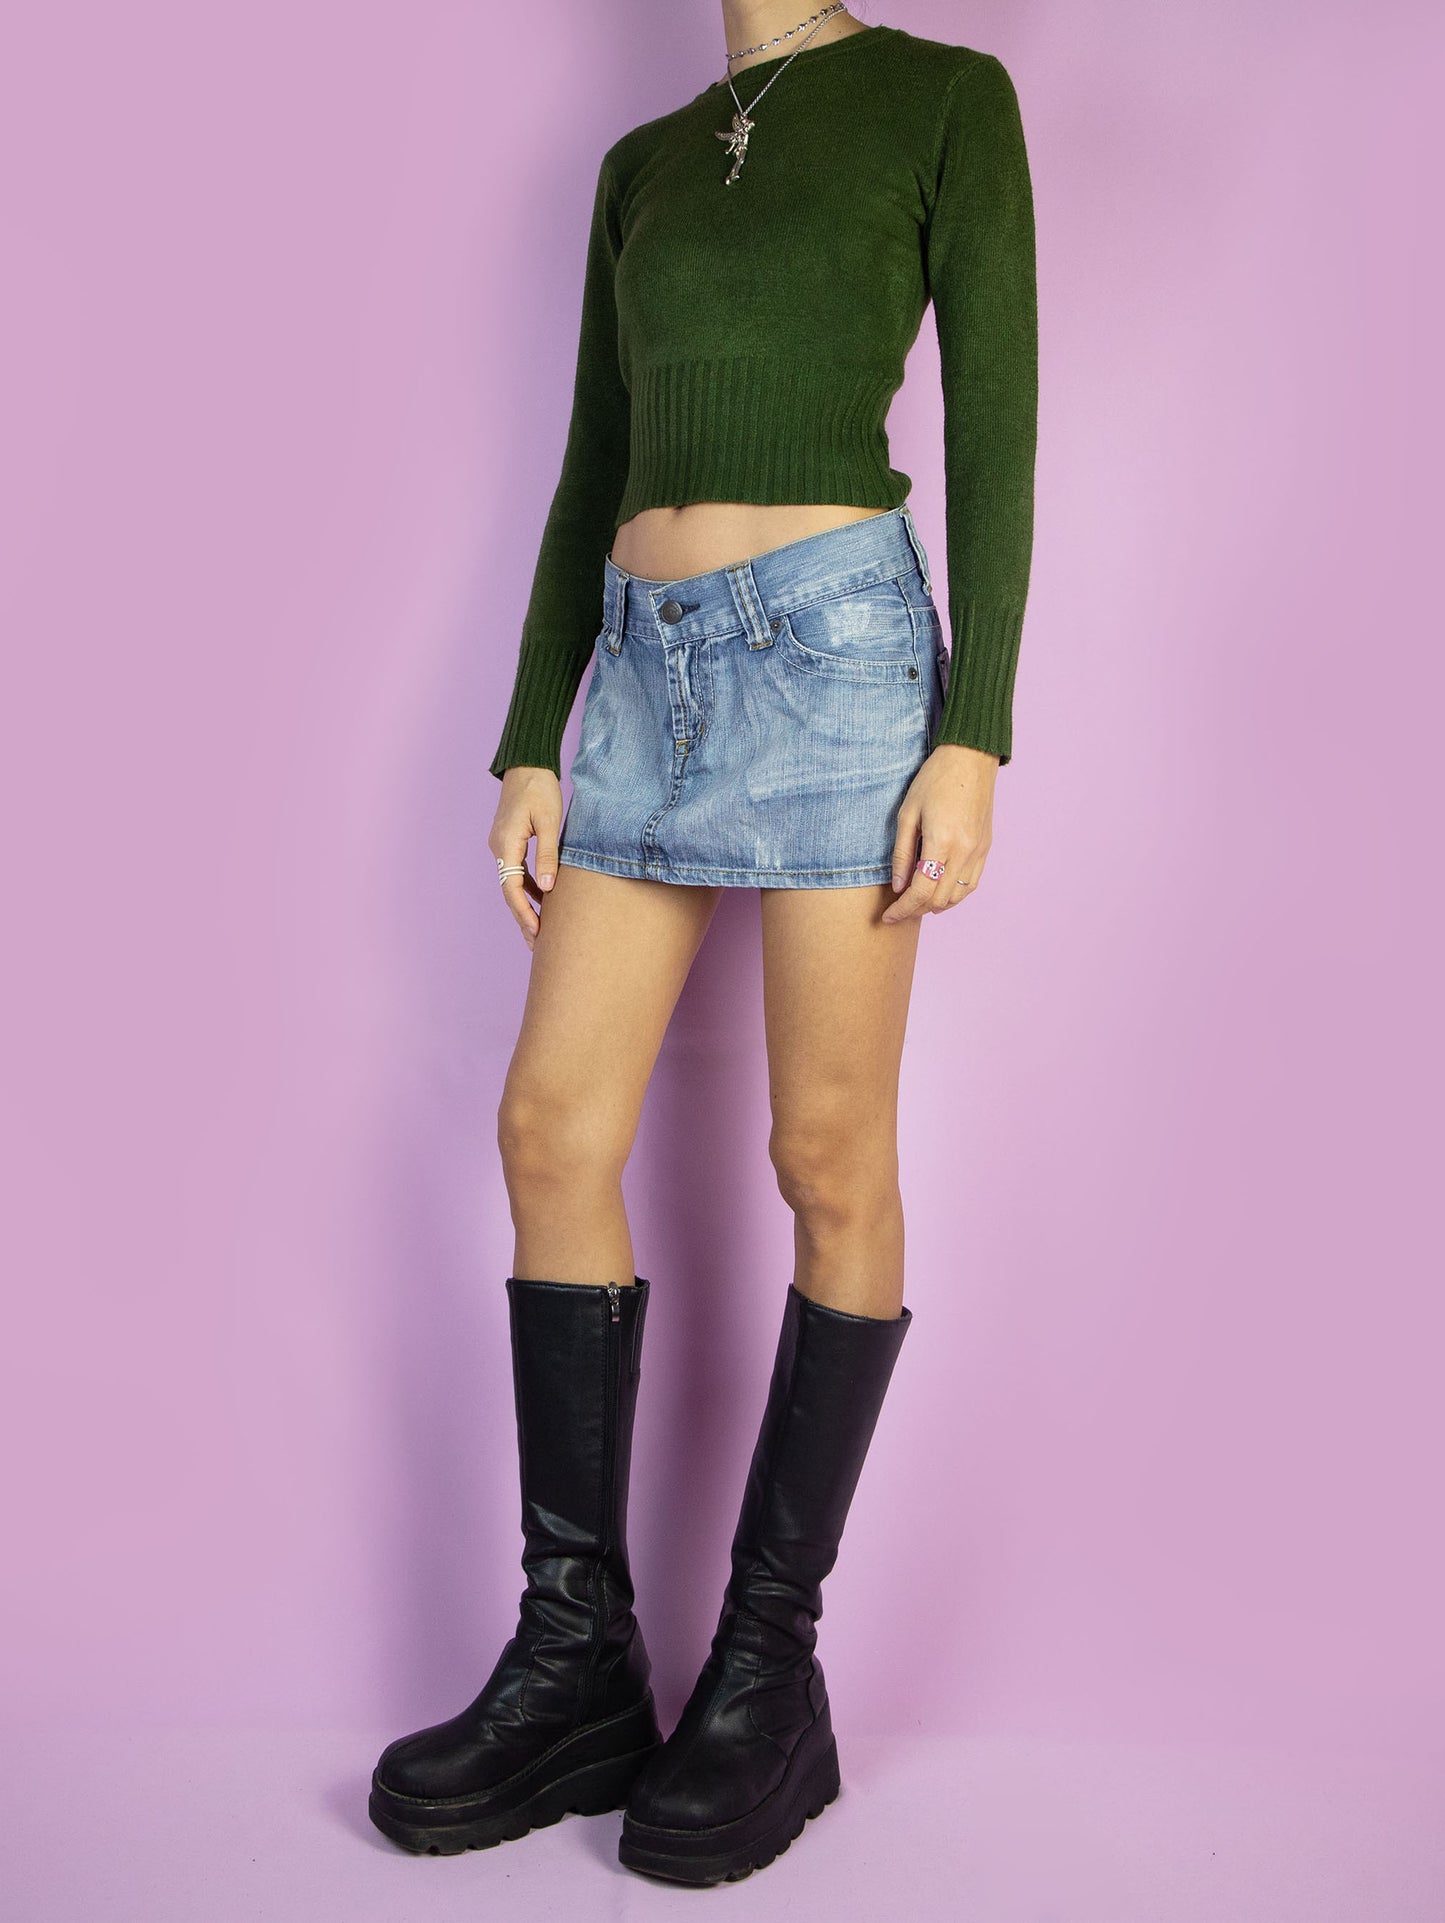 The Y2K Low Rise Denim Mini Skirt is a vintage low-waisted skirt with pockets and a zipper closure. Cyber grunge 2000s jean micro mini skirt.